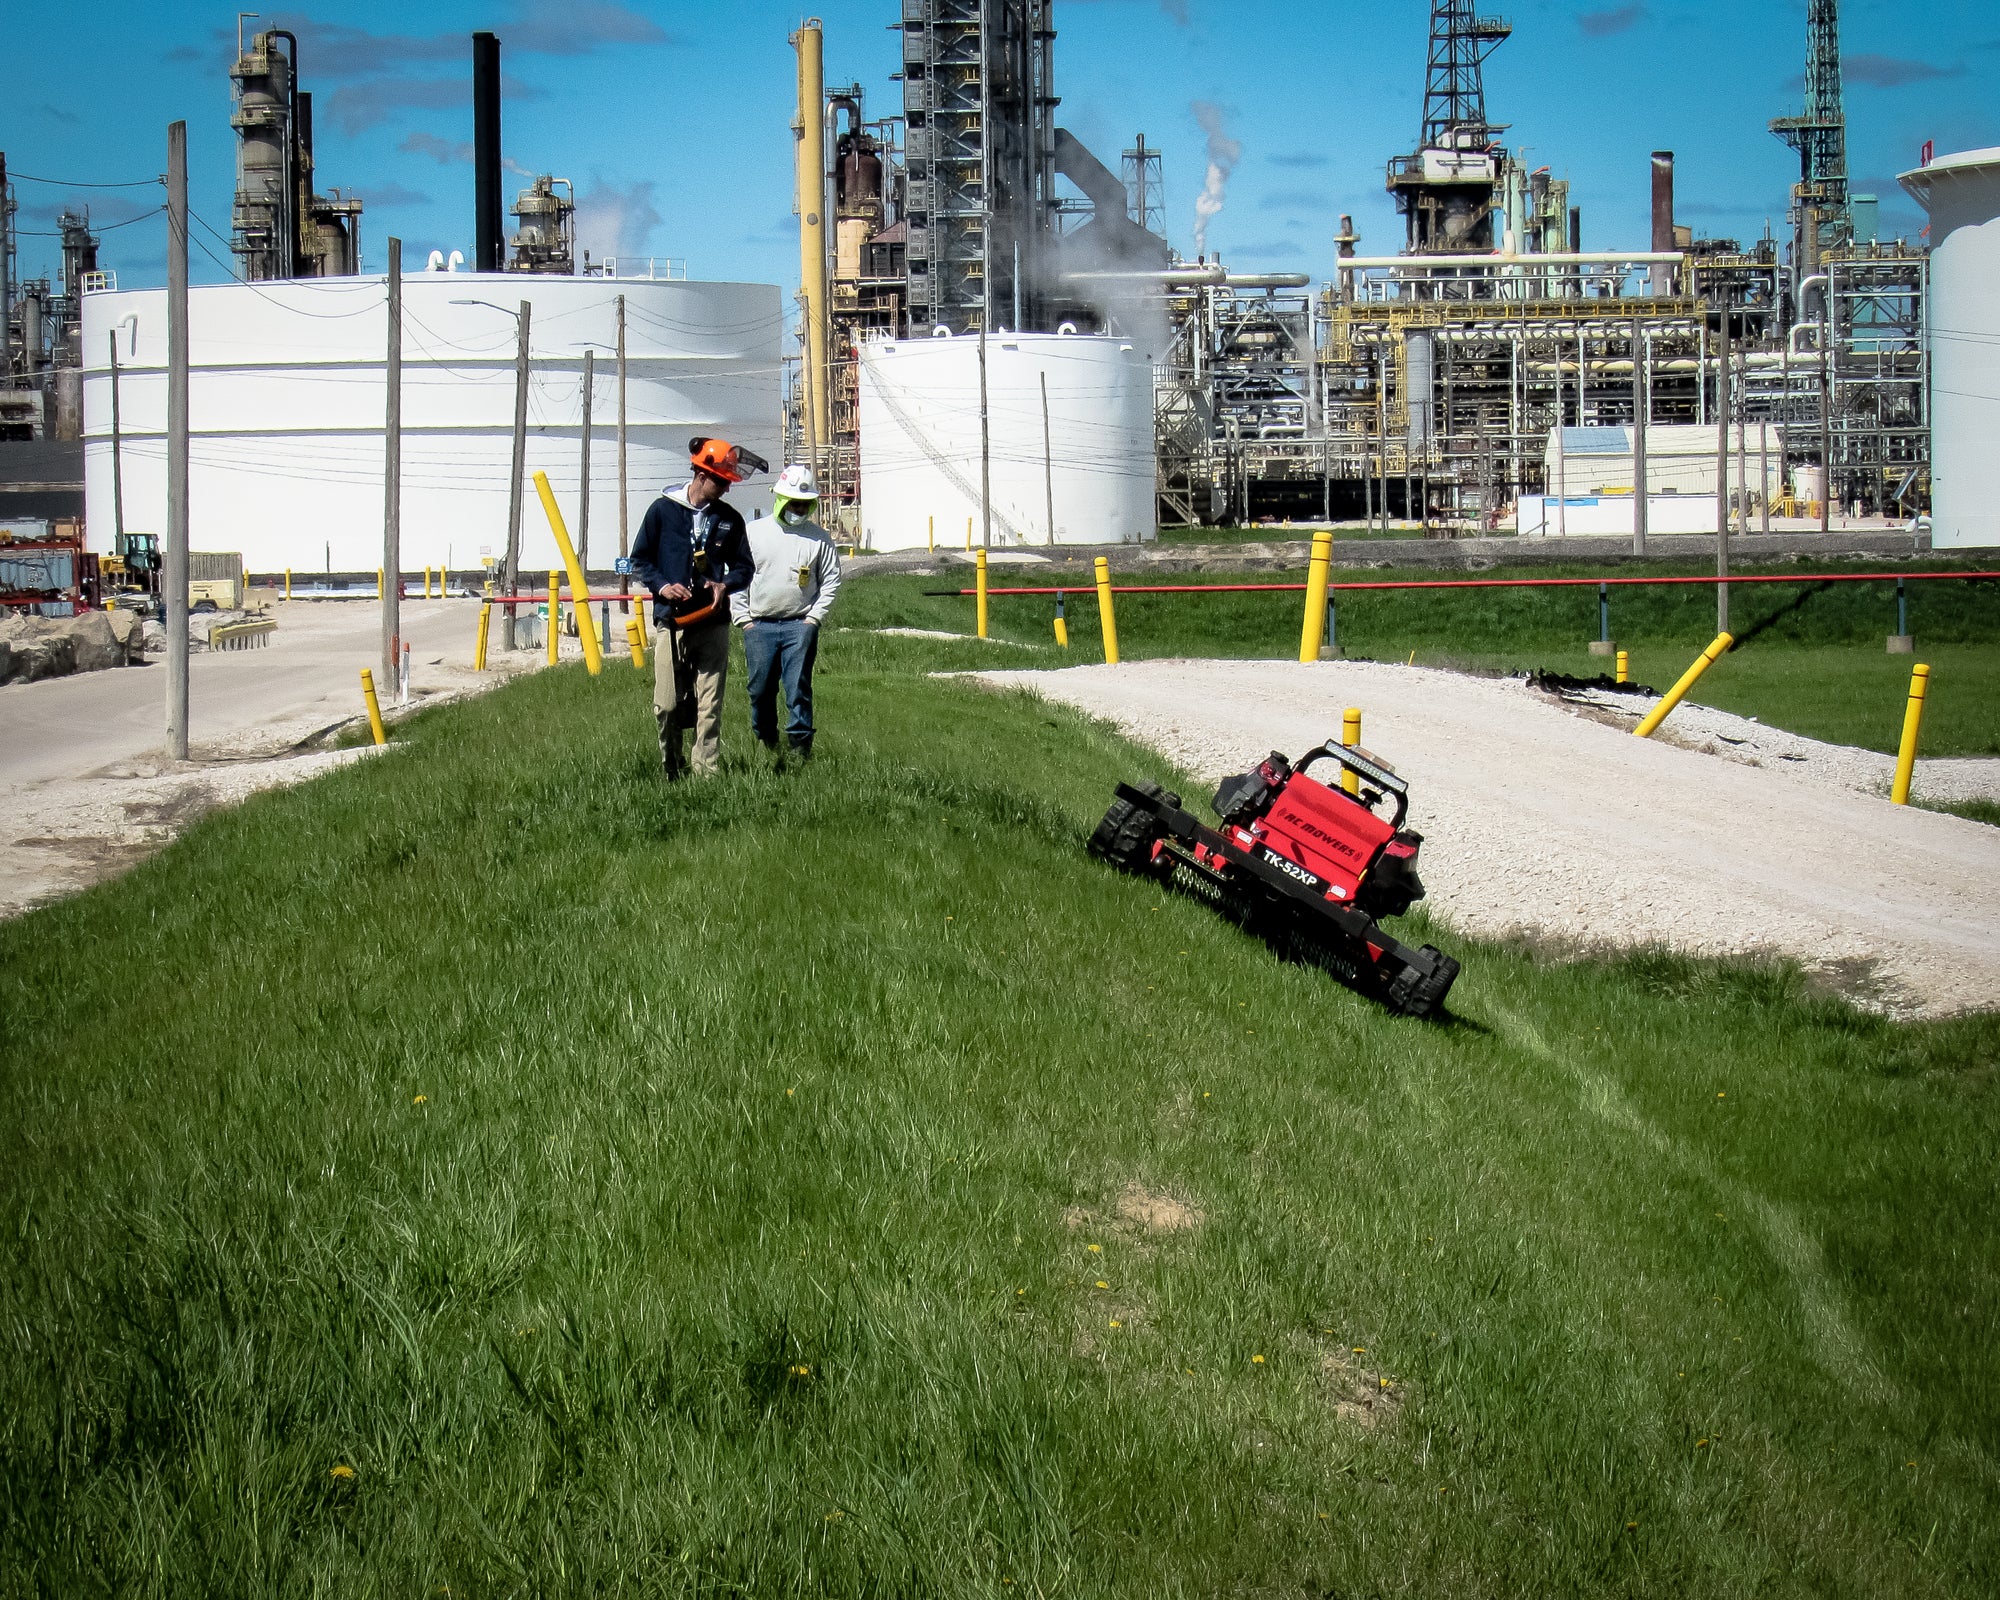 RC MOWERS' REMOTE-OPERATED ROBOTIC MOWER ALLOWS LANRACORP TO PAY ITS EMPLOYEES MORE WHILE SAVING TIME, REDUCING MANPOWER AND PROVIDING A SAFE WORKSITE